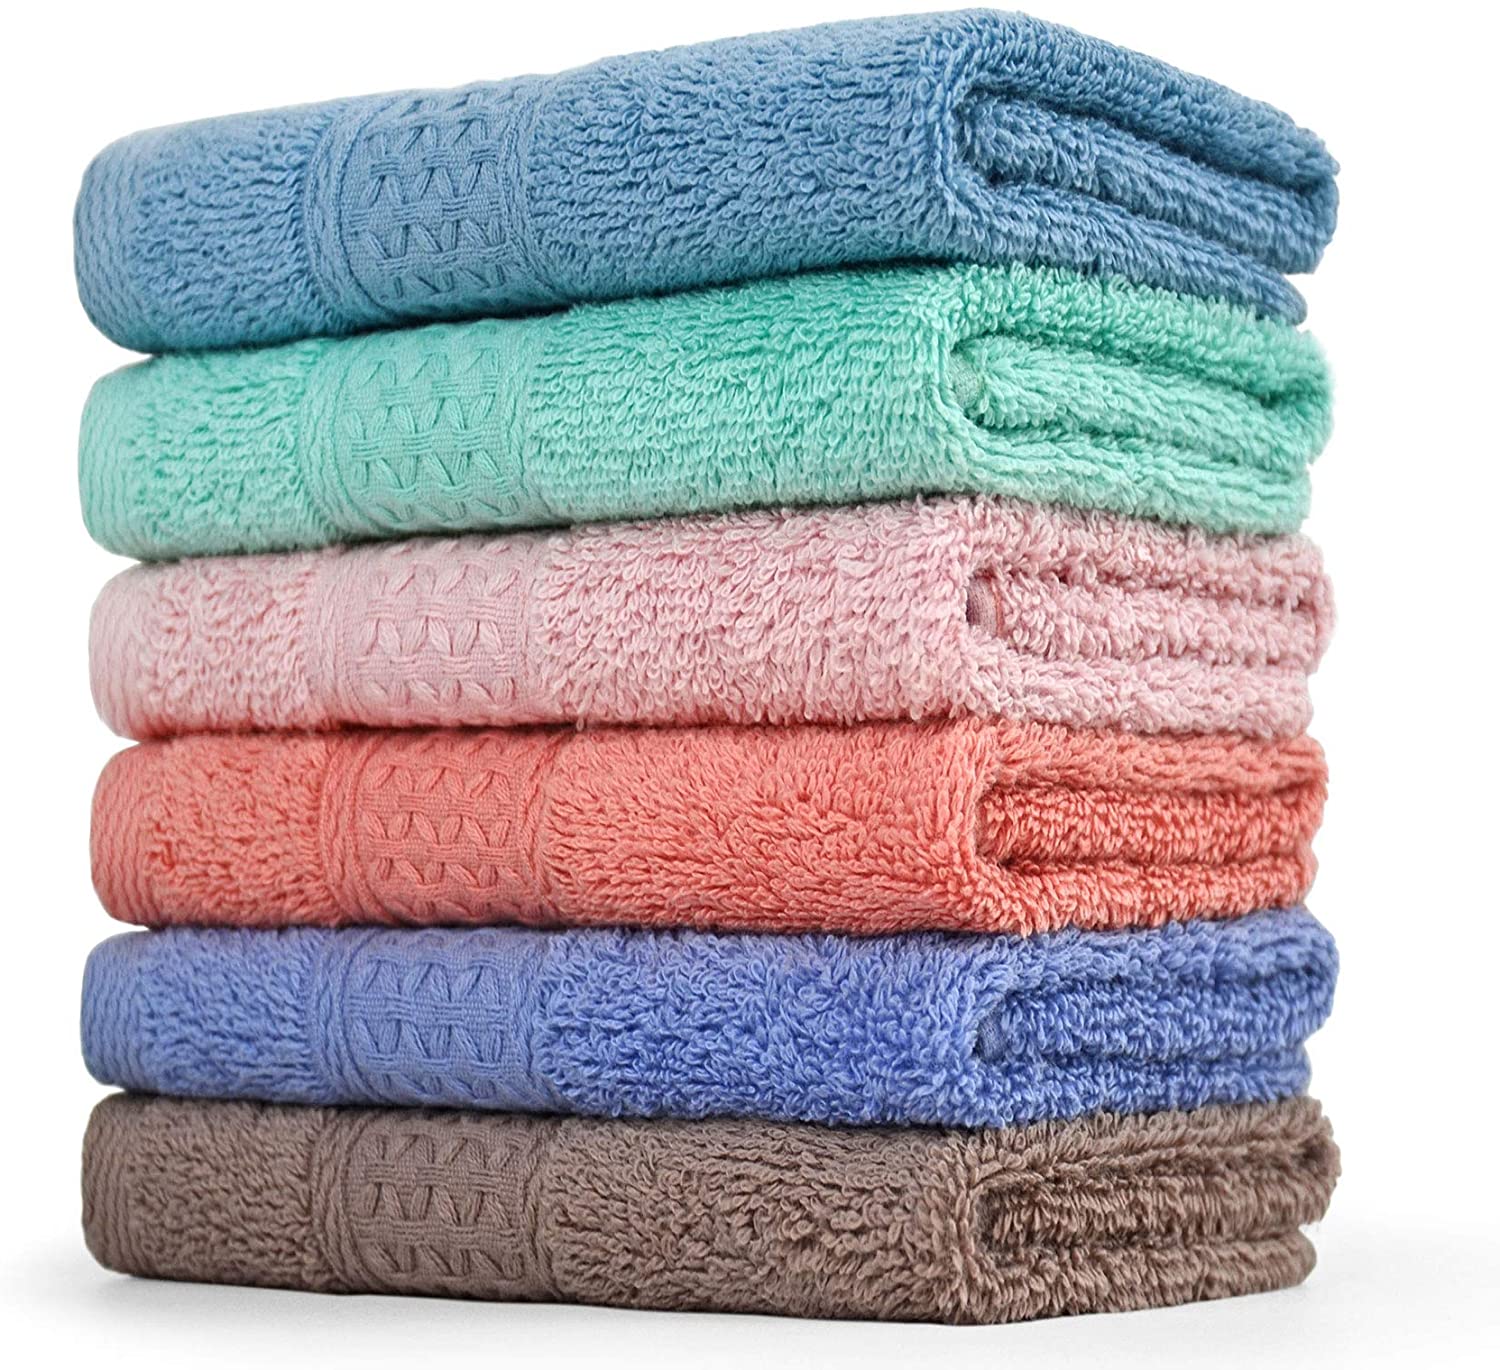 Cleanbear High-Absorbancy Cotton Washcloth, 6-Pack